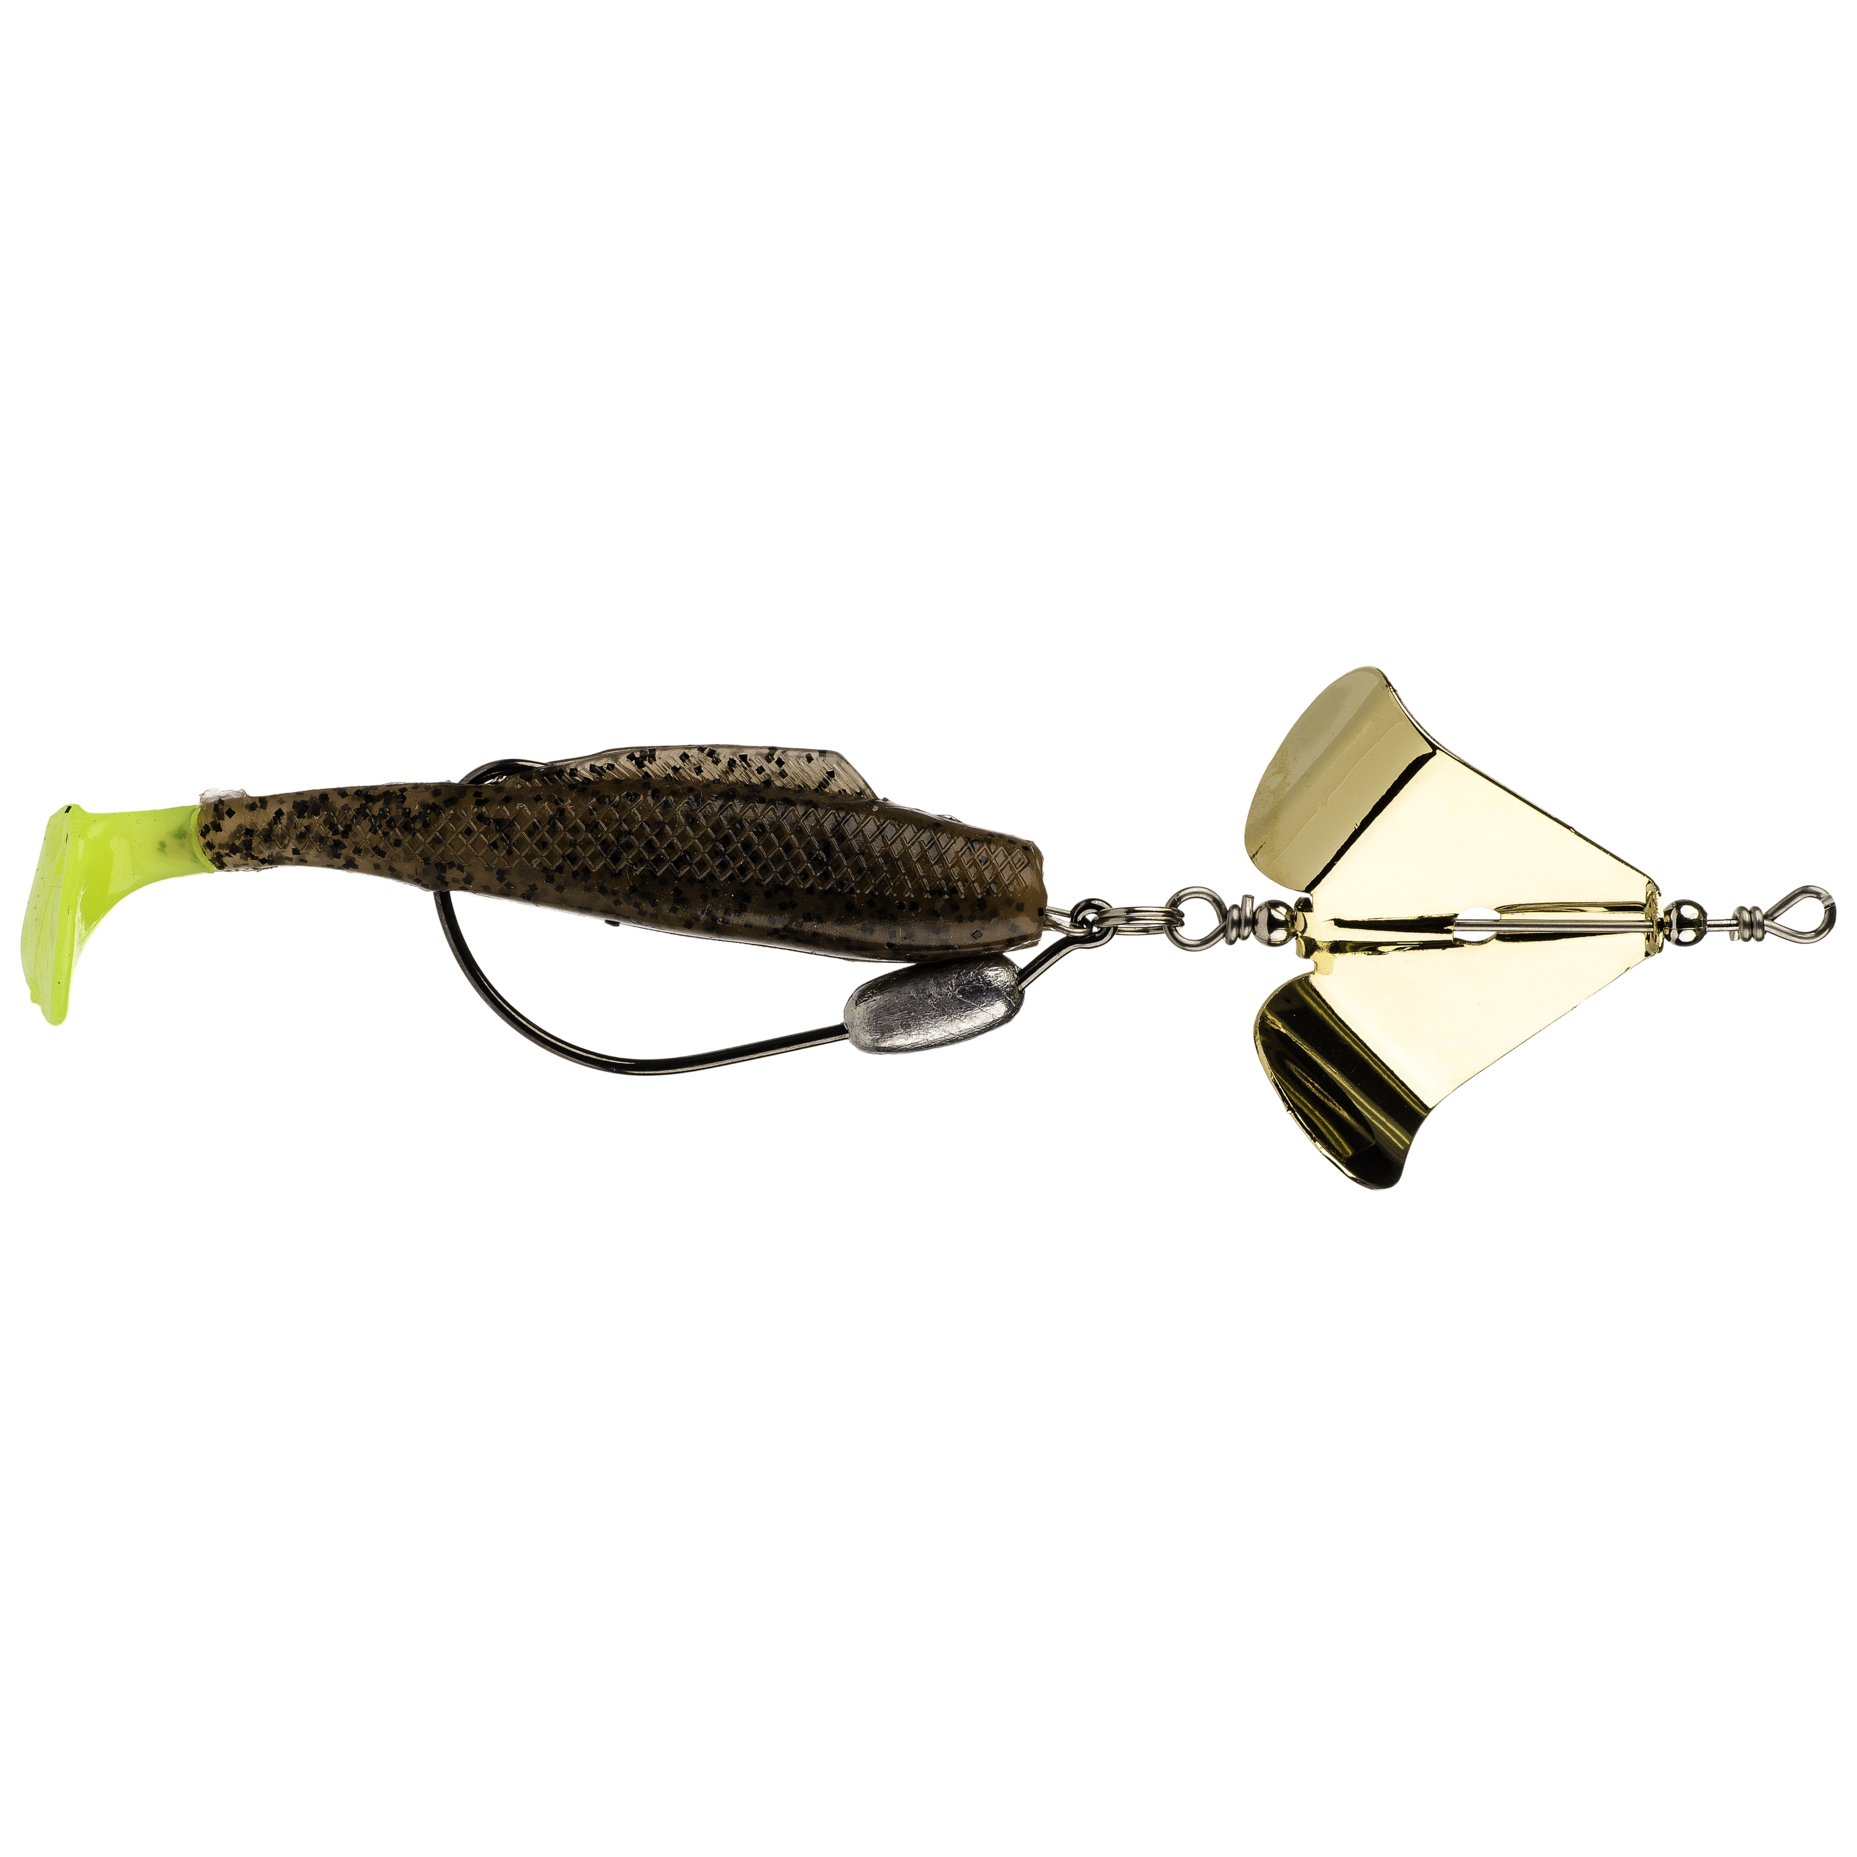 Speckled Trout Magic Jig Head 1/4oz